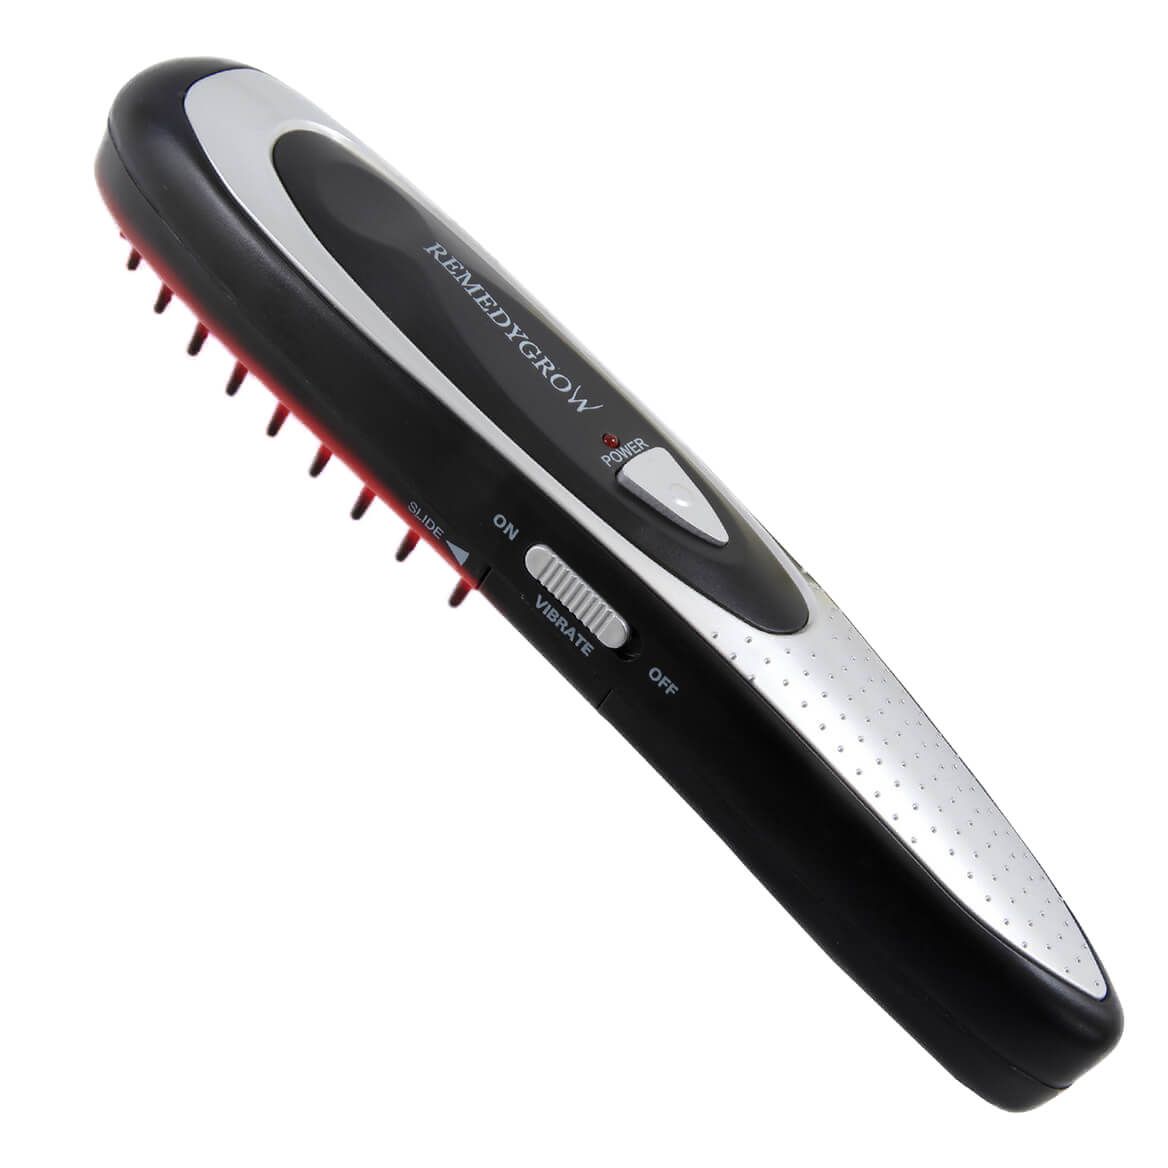 RemedyGrow Infrared Hair Growth Comb + '-' + 368036